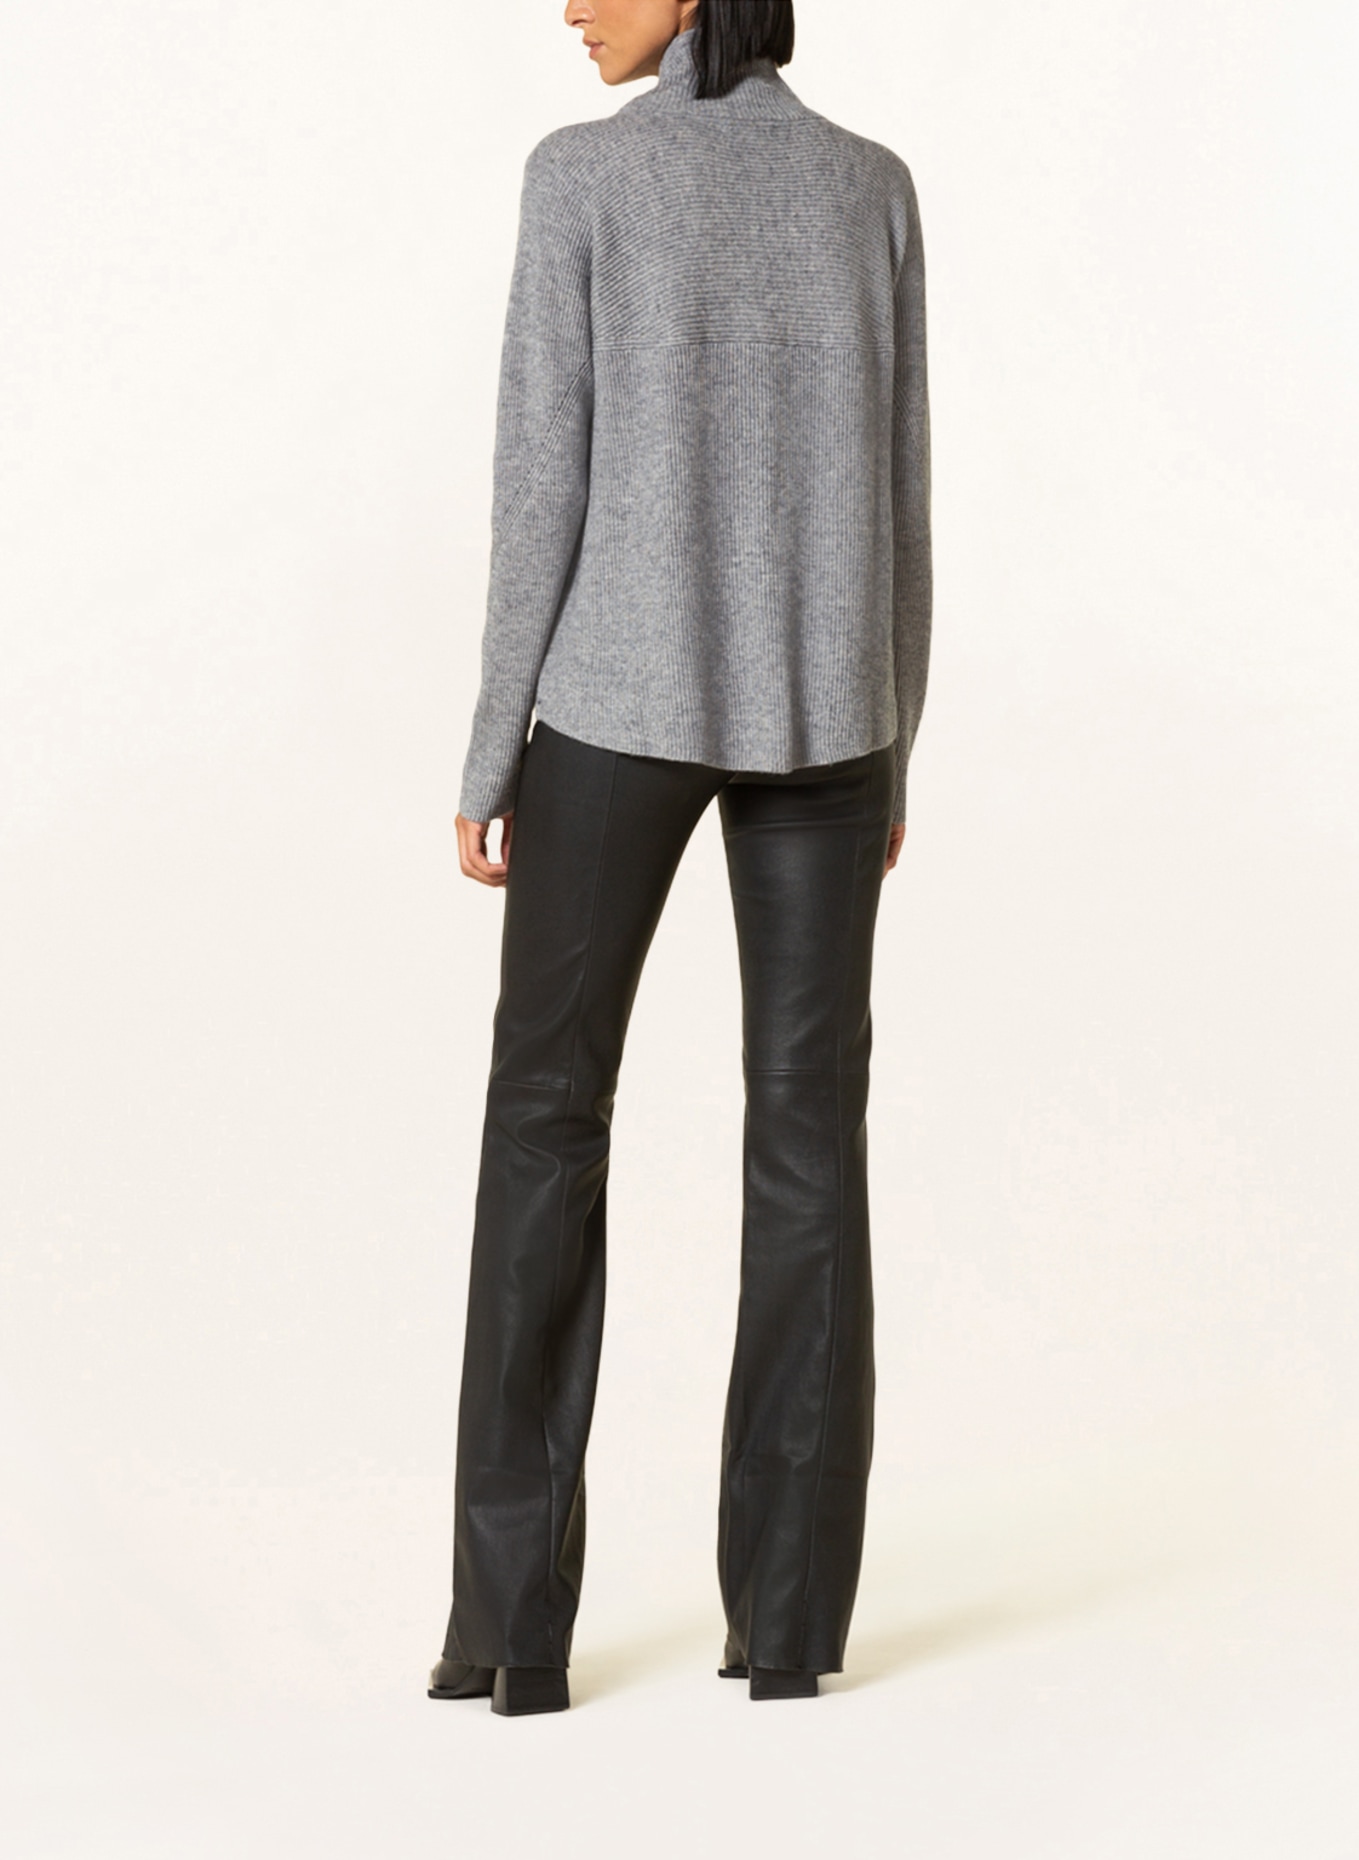 REPEAT Sweater, Color: GRAY (Image 3)